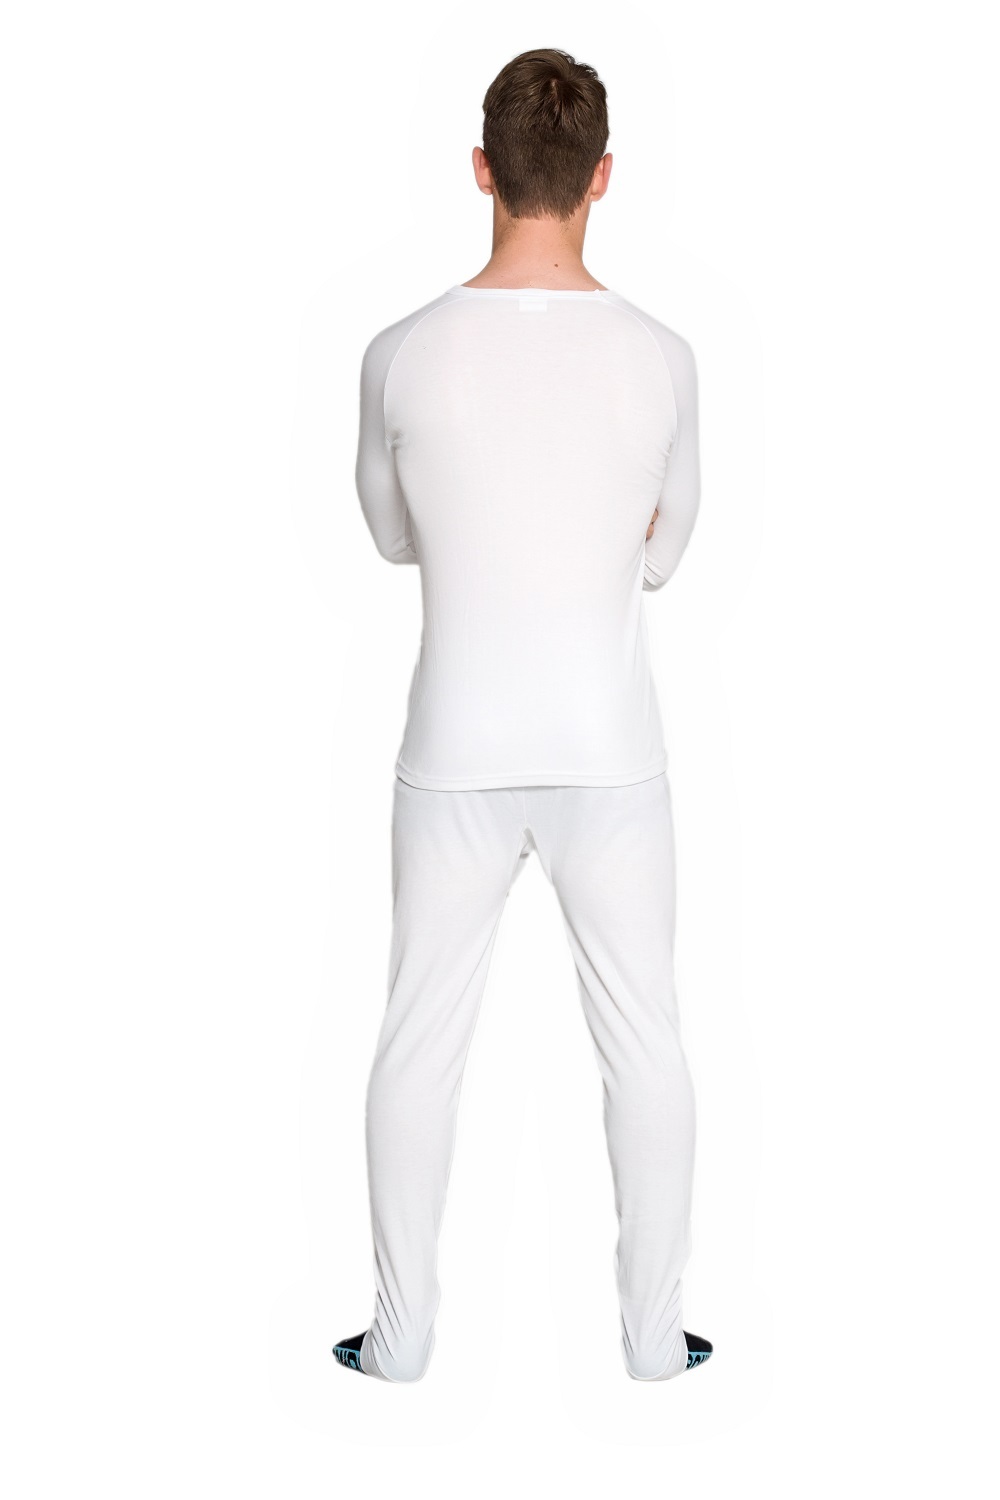 Mens White 2 Pack Cotton Blend Thermal Underwear Long Sleeve